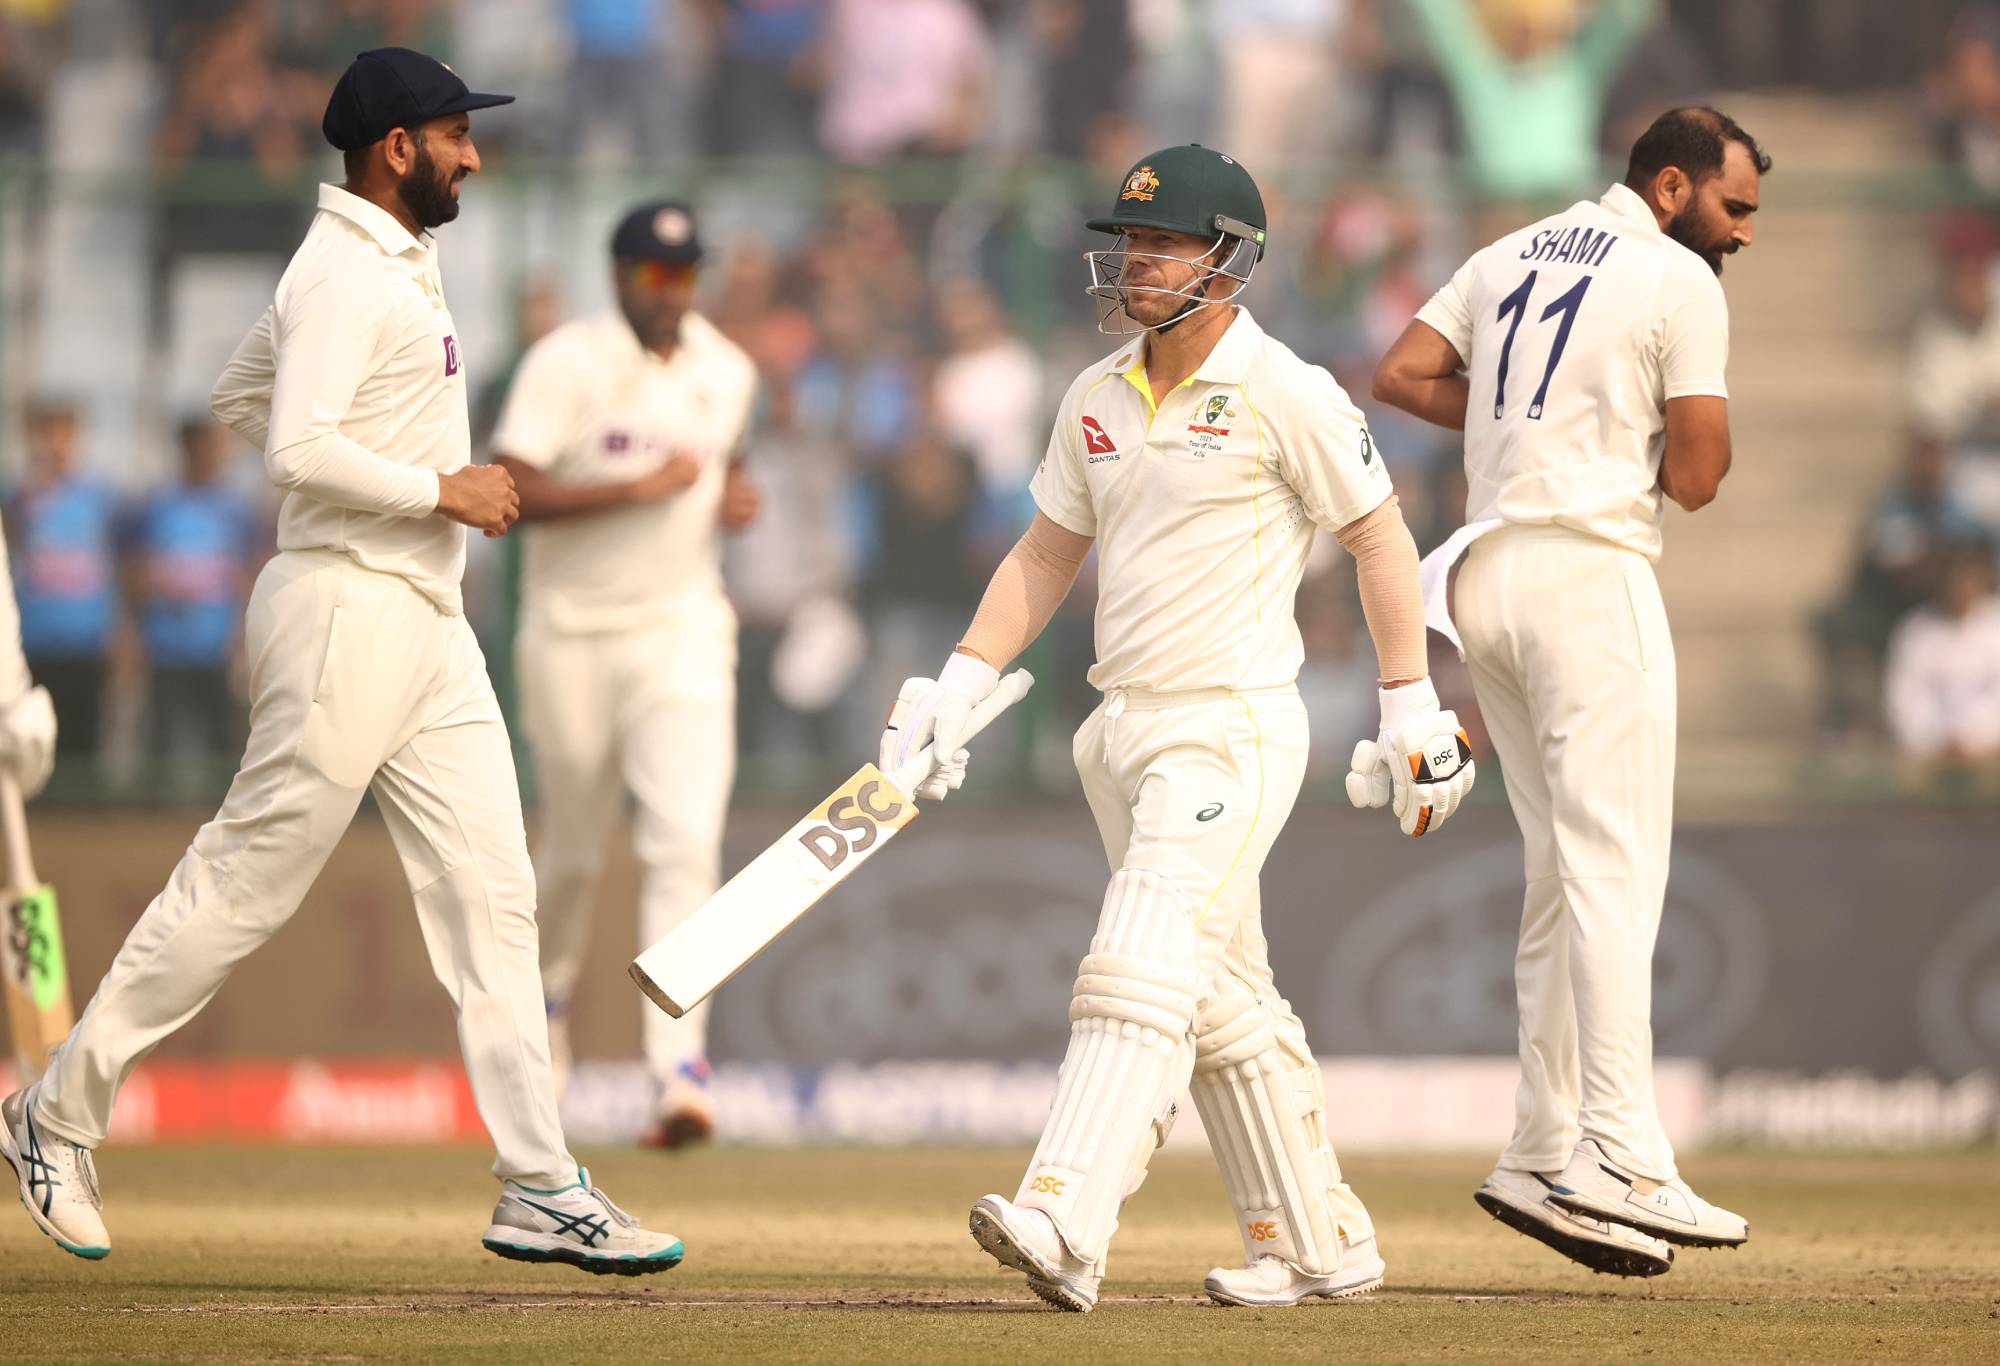 DELHI, INDIA - FEBRUARY 17: David Warner of Australia walks off after he was dismissed by Mohammed Shami of India during day one of the Second Test match in the series between India and Australia at Arun Jaitley Stadium on February 17, 2023 in Delhi, India. (Photo by Robert Cianflone/Getty Images)